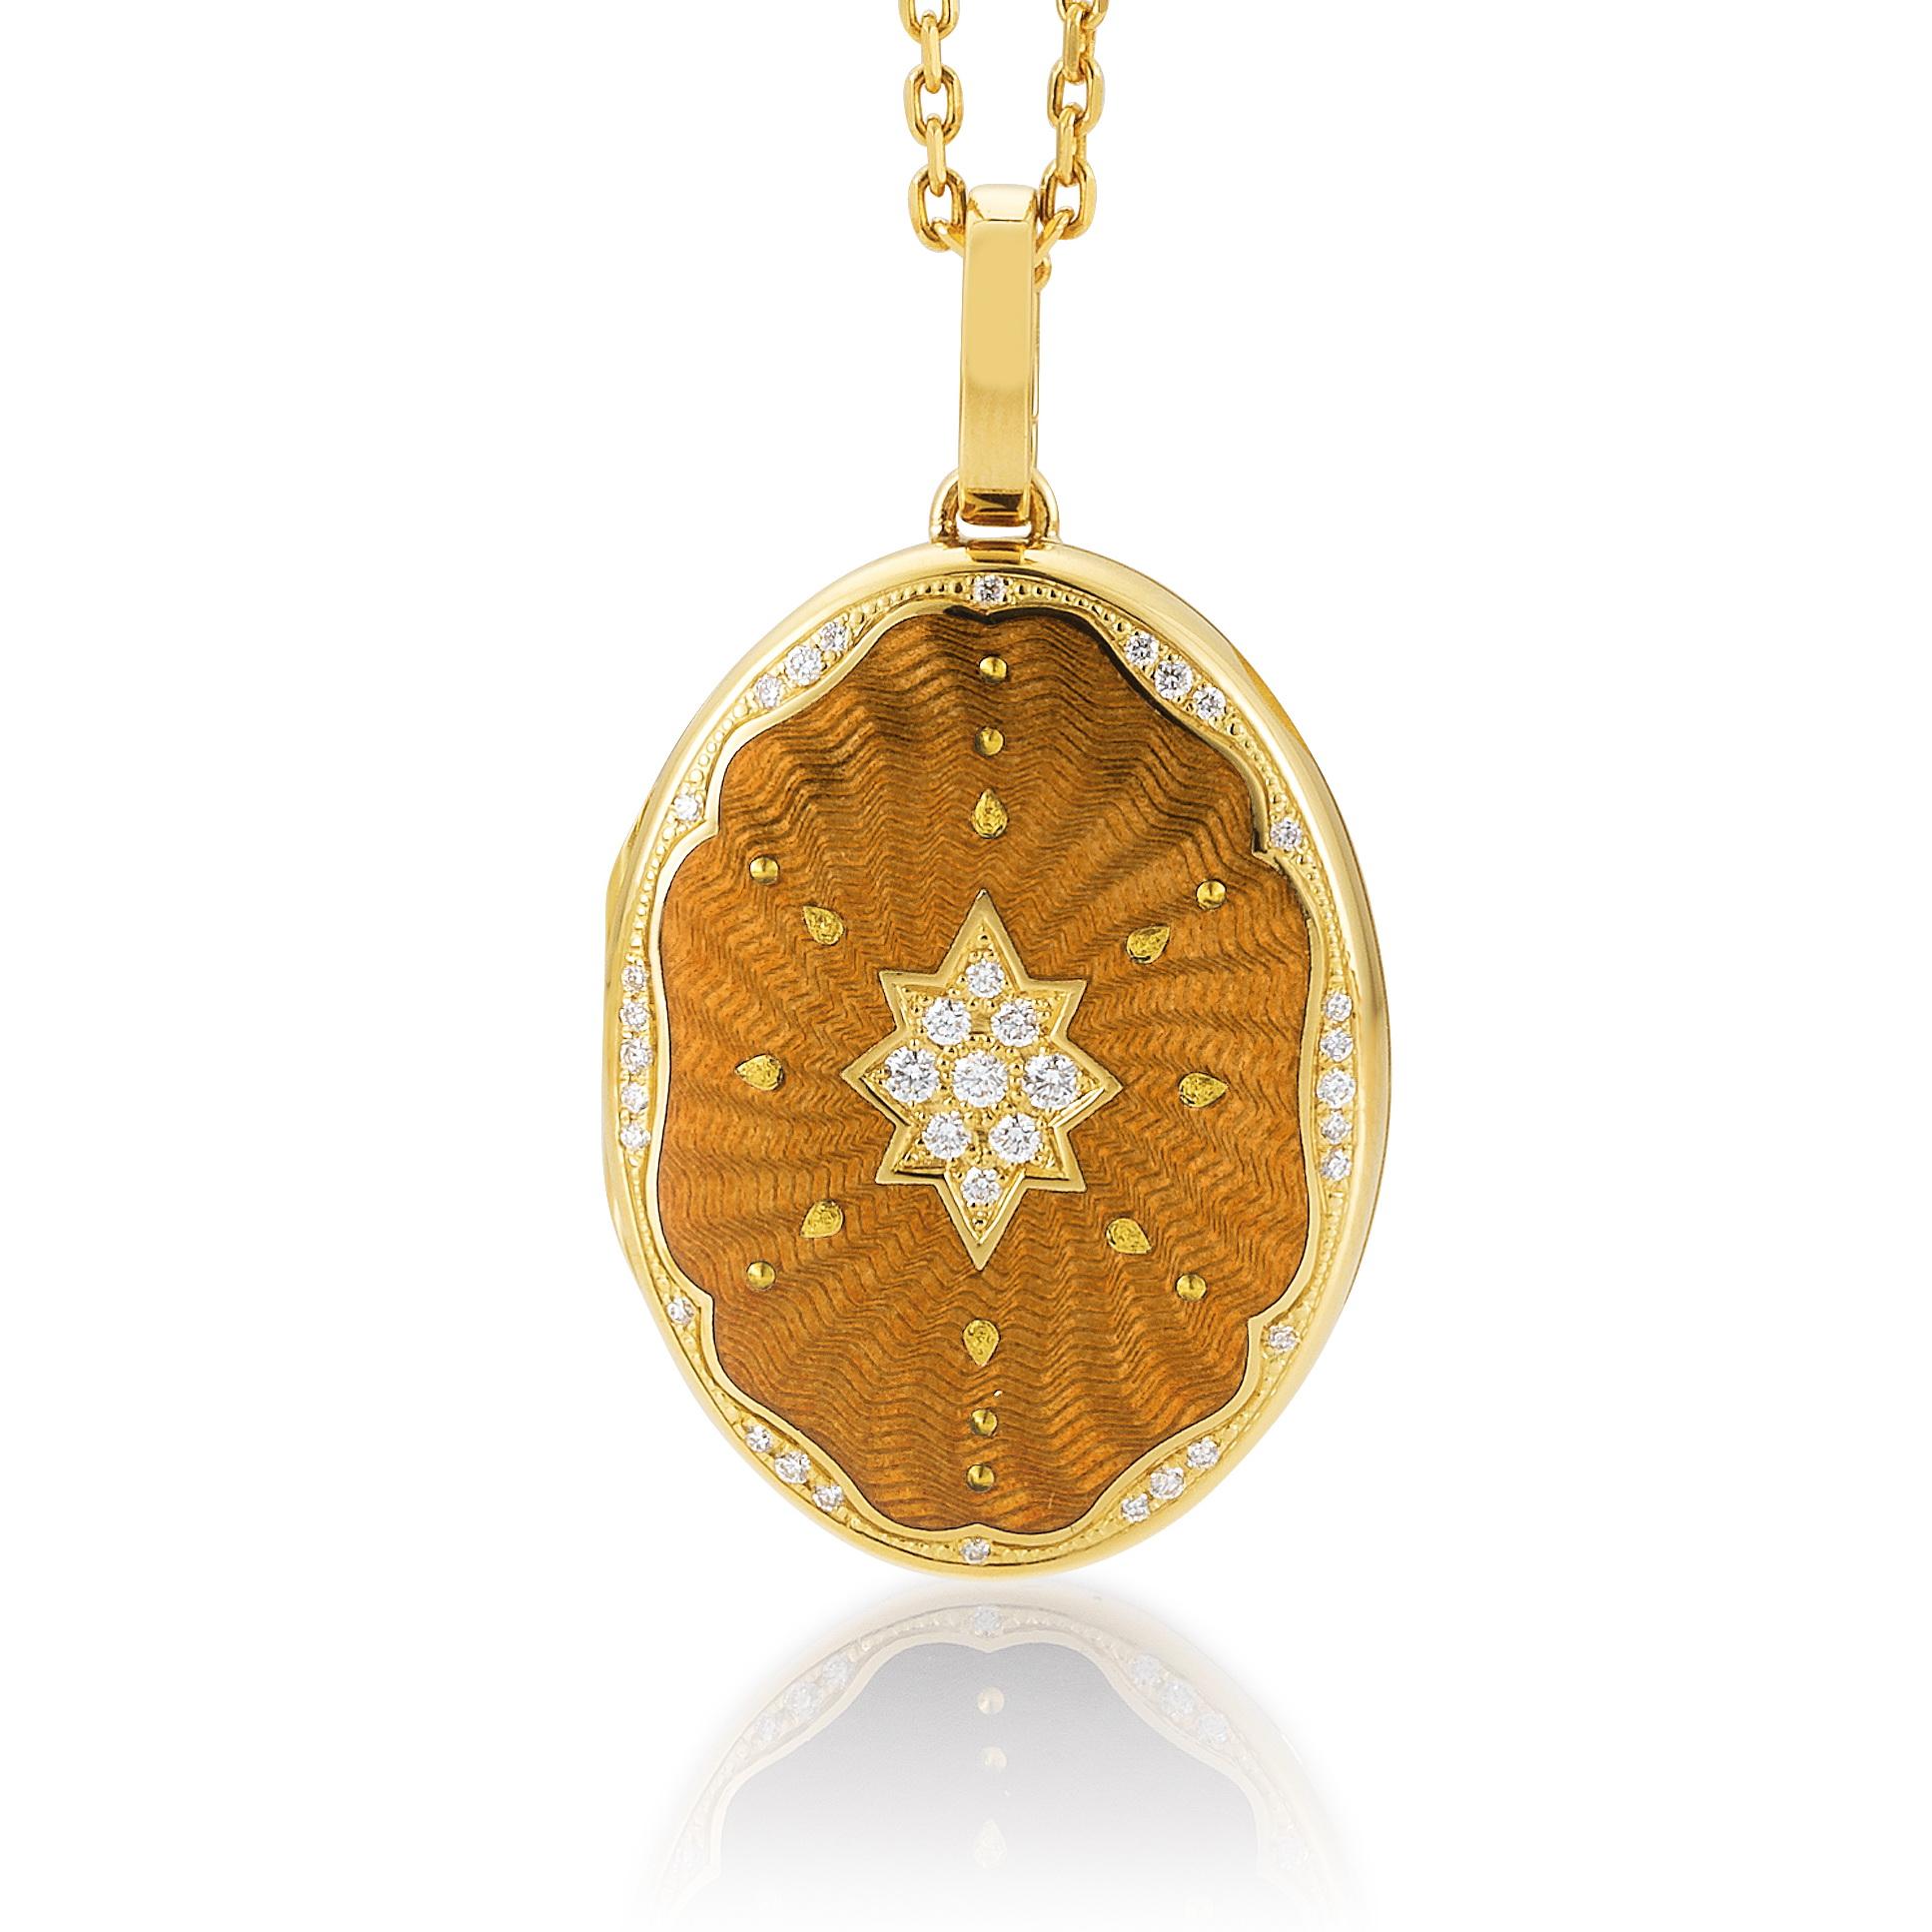 Contemporary Oval Locket Pendant Necklace 18k Yellow Gold Yellow Enamel 37 Diamonds 0.29 ct For Sale